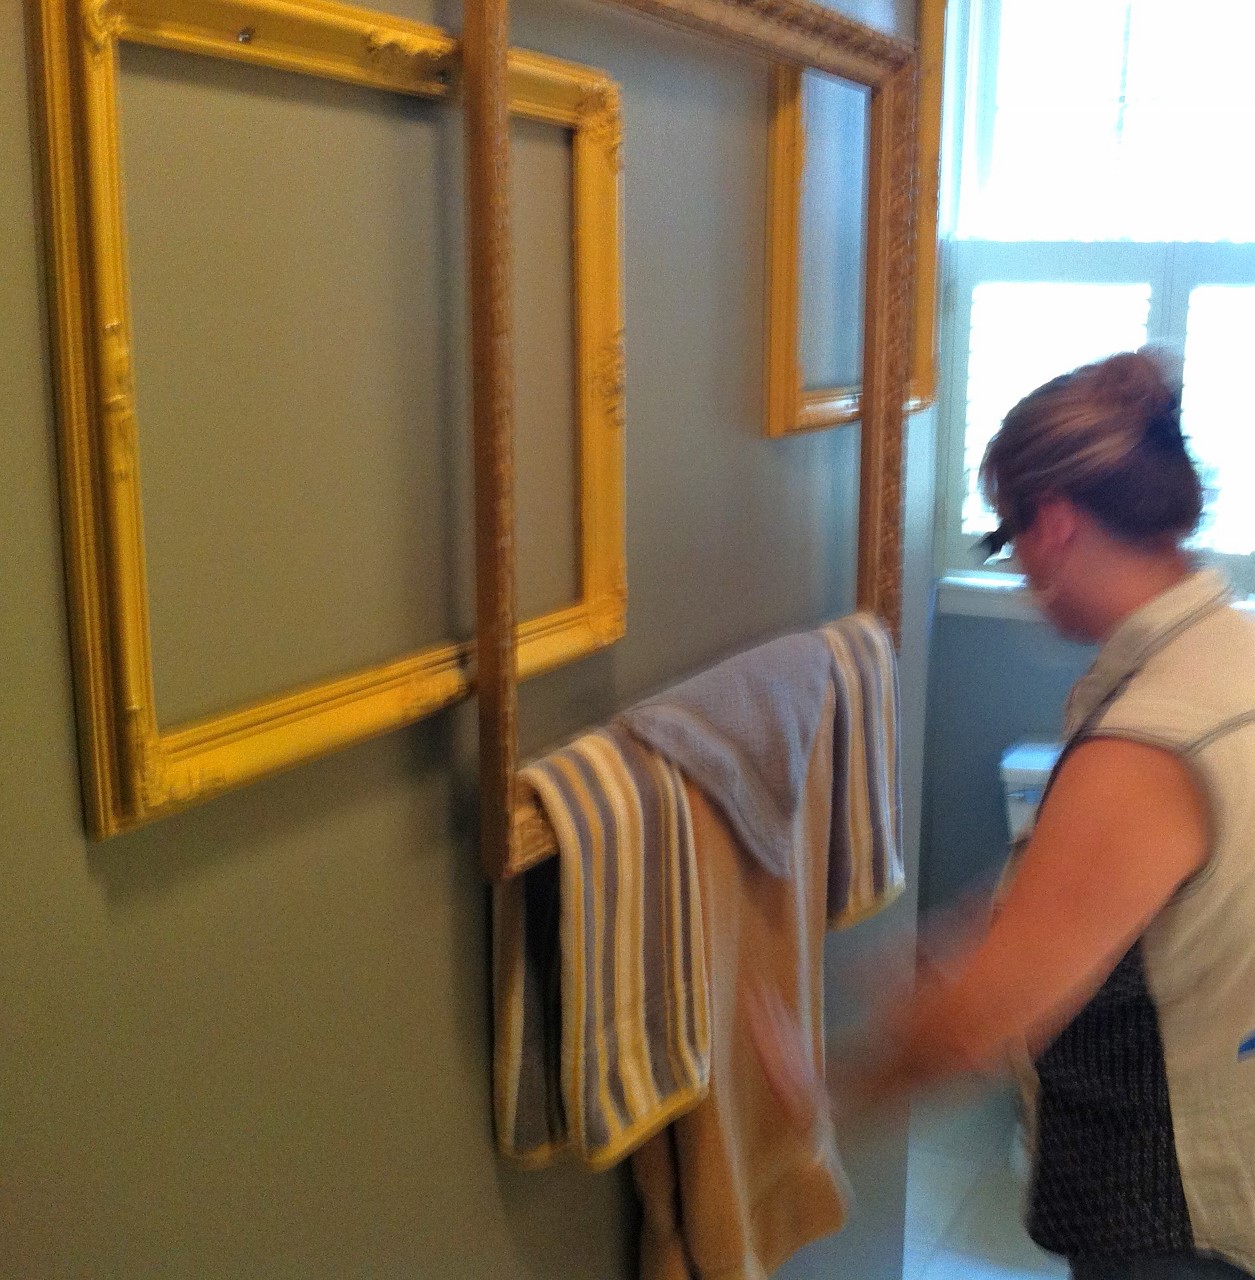 Once dry and contoured, paint over the holes to blend with frame ...